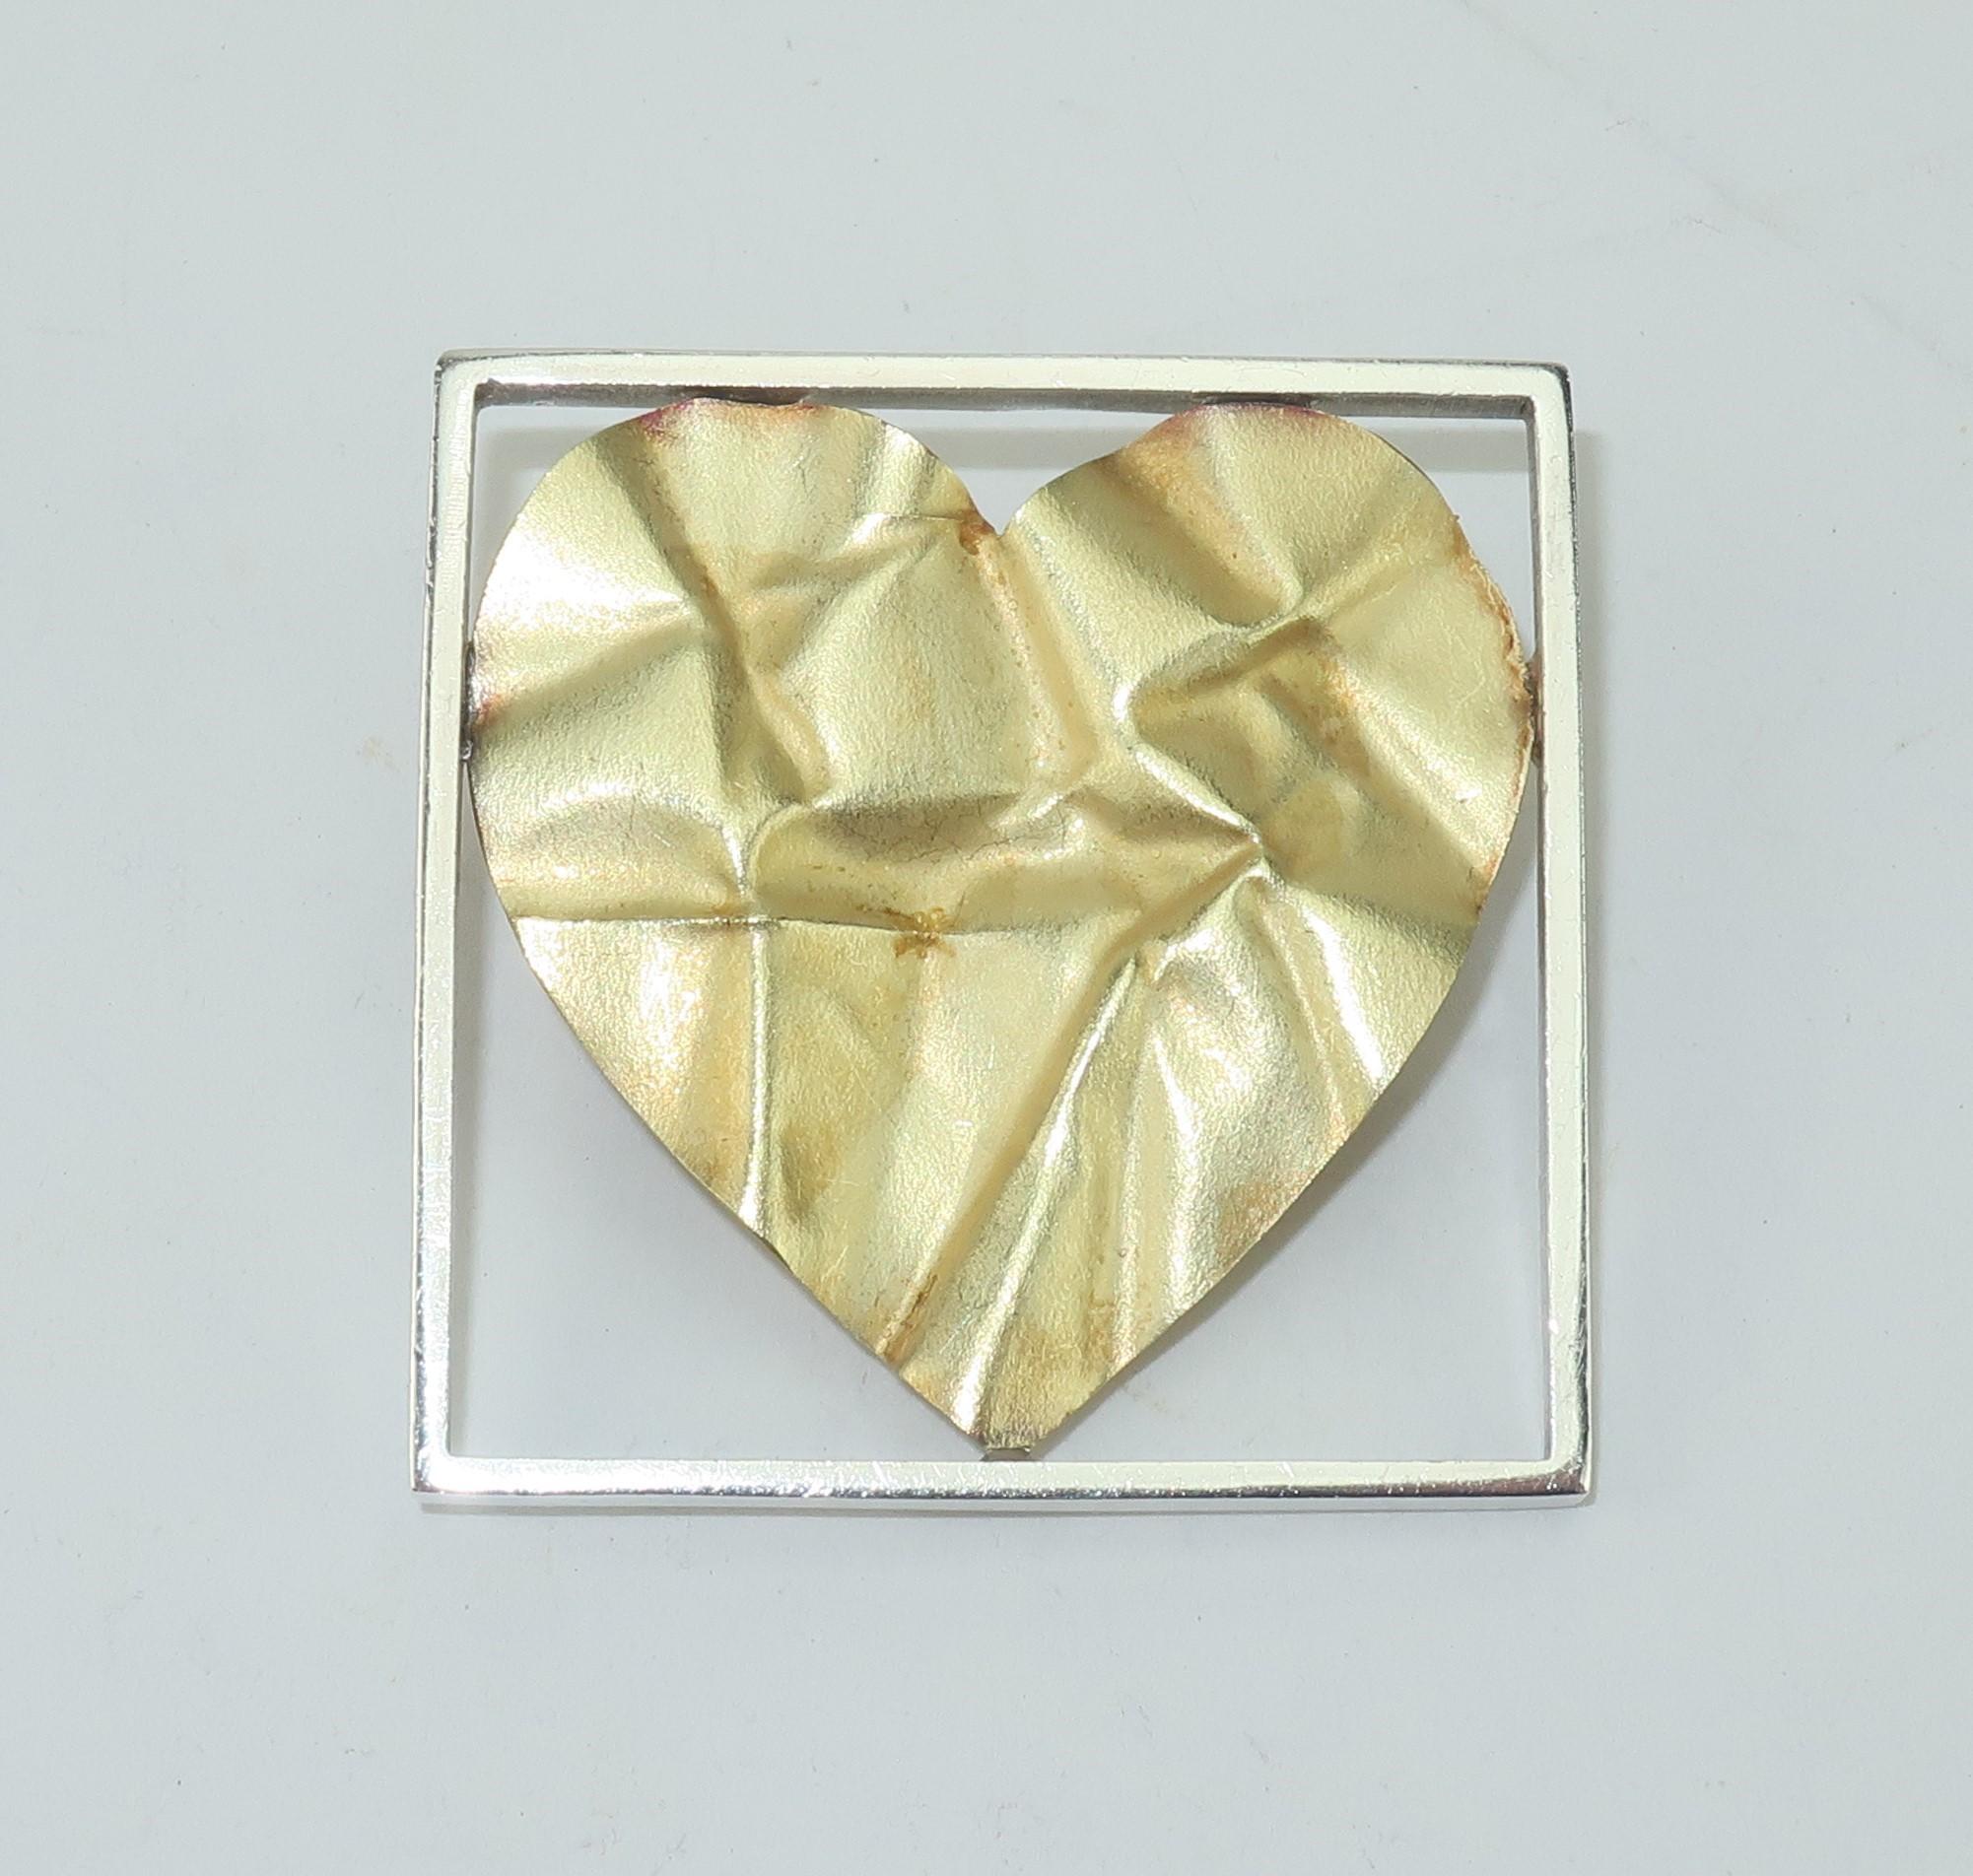 The crumpled heart tells a story as Pat Flynn, New York goldsmith, intended with his iconic contemporary design.  Mr. Flynn's hearts have been a constant in his repertoire of modernist jewelry and this sterling silver and 18K gold 'crumpled' heart